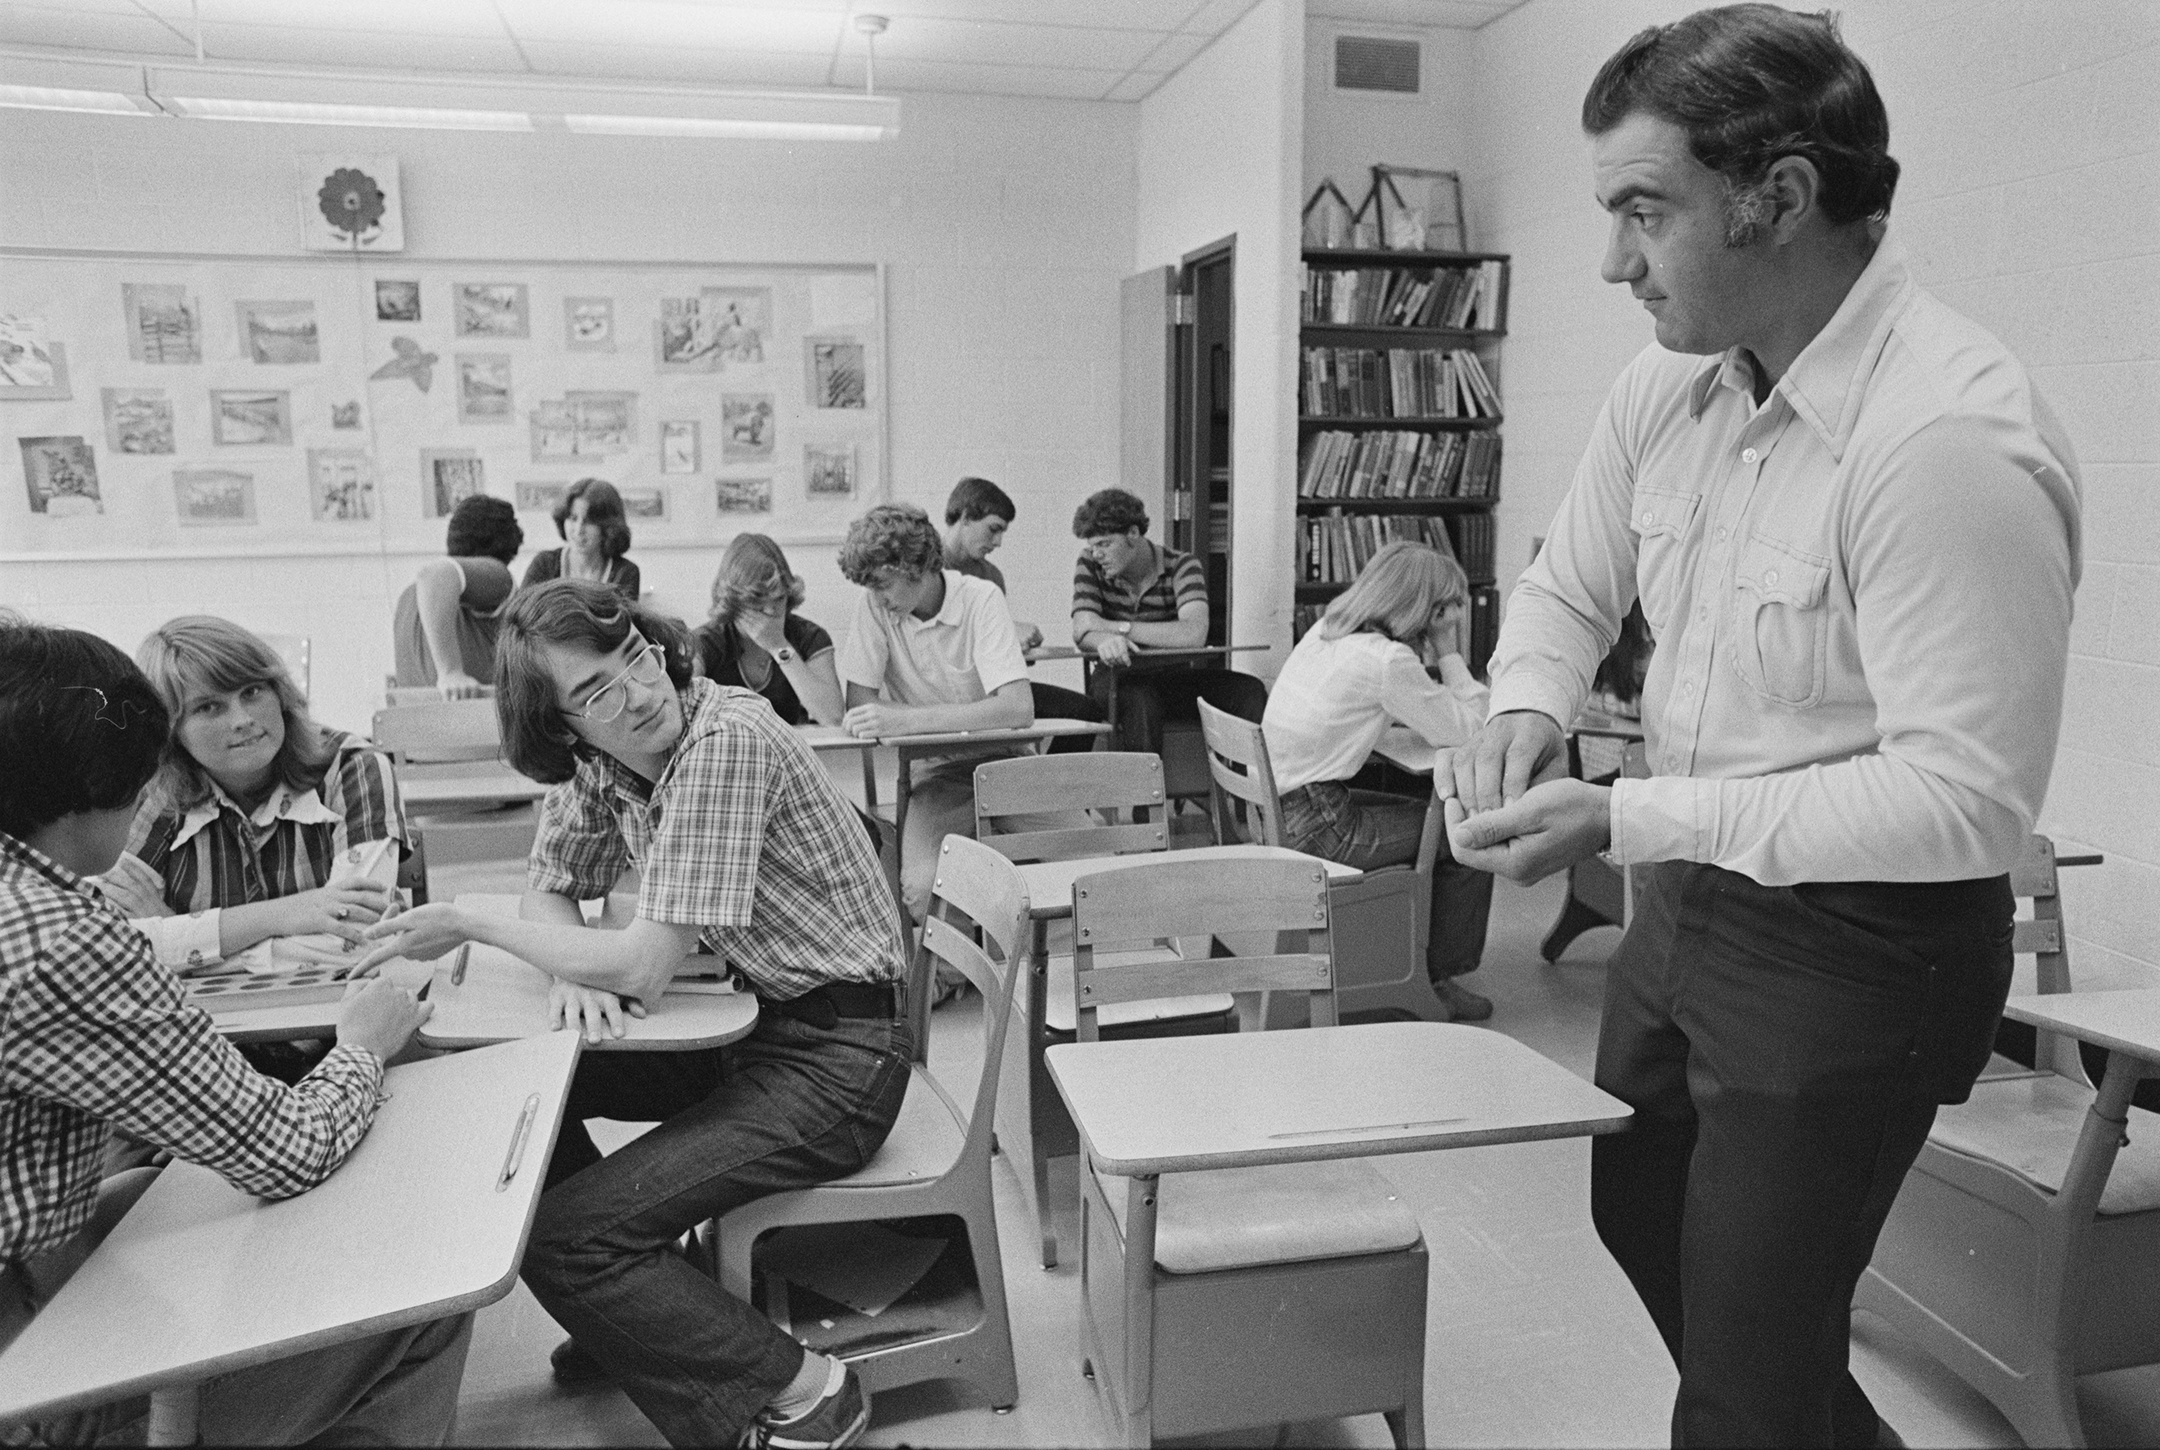 Black and white photograph of a male teacher at the front of a high school classroom teaching students sitting at desks